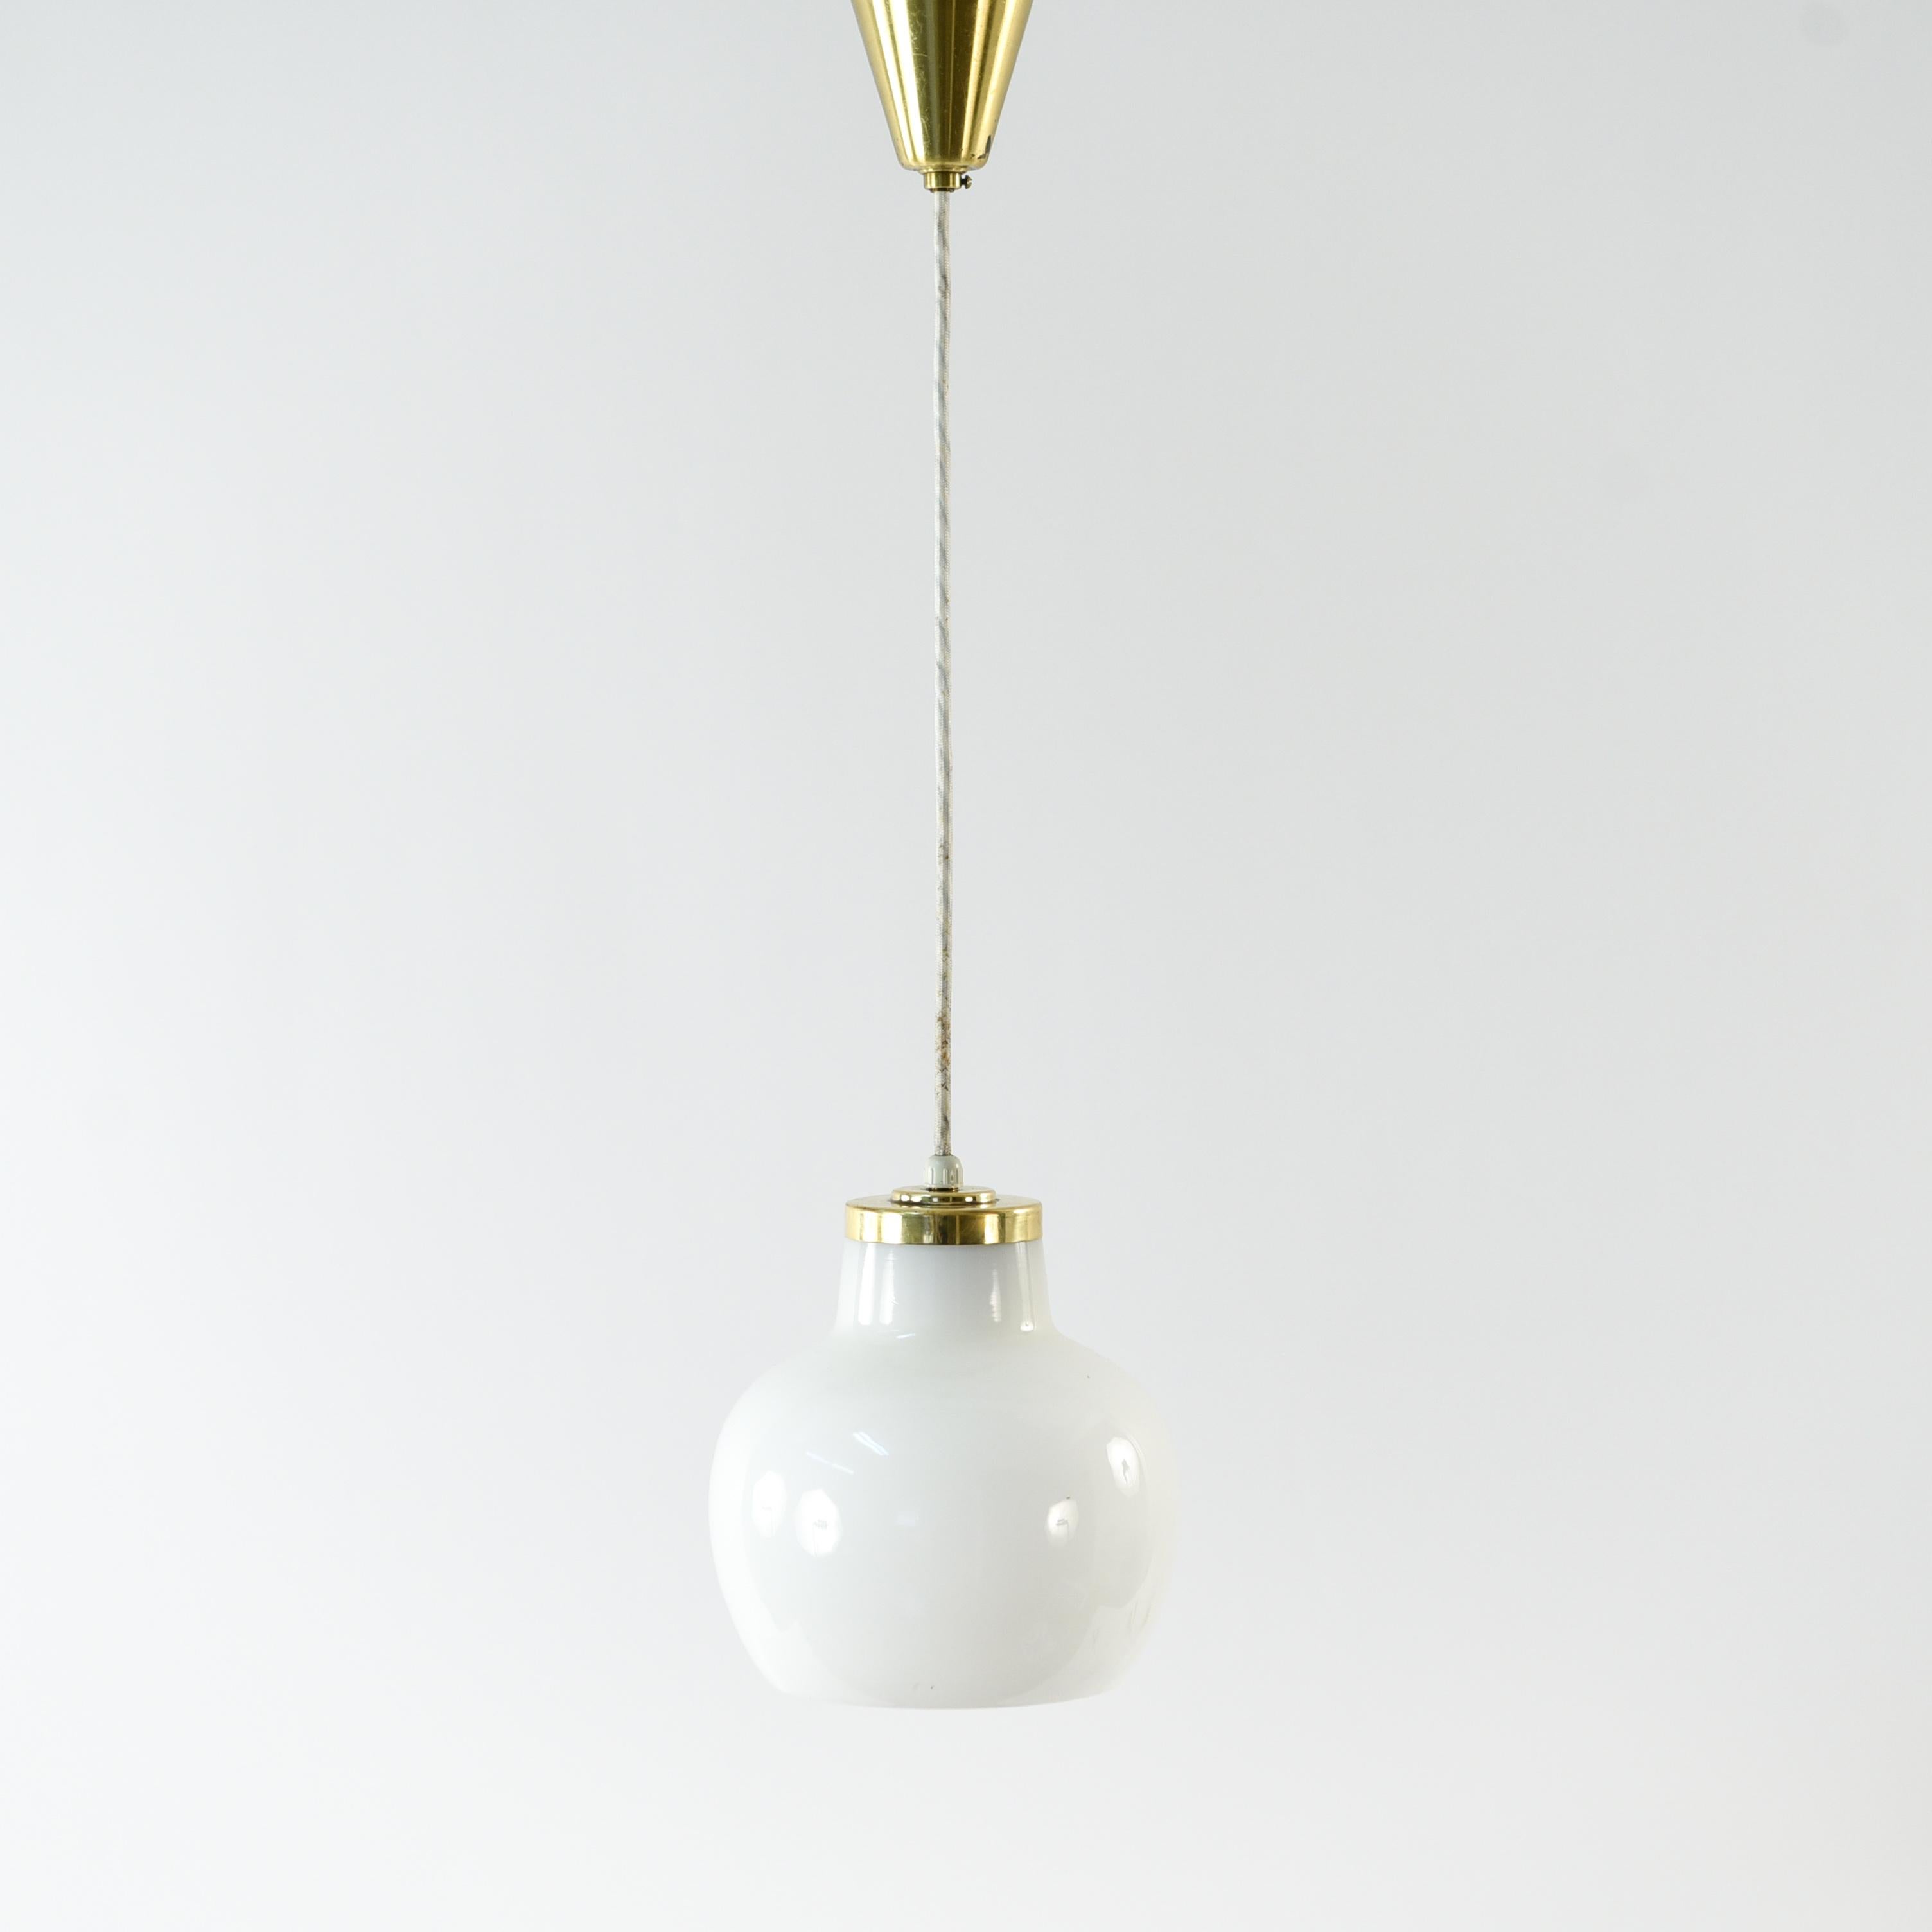 This pendant designed by Vilhelm Lauritzen and manufactured by Louis Poulsen is executed in handblown glossy white opal glass, with a brushed brass pendant tube. This pair has a sleek, modern look and can be used together or independently to create